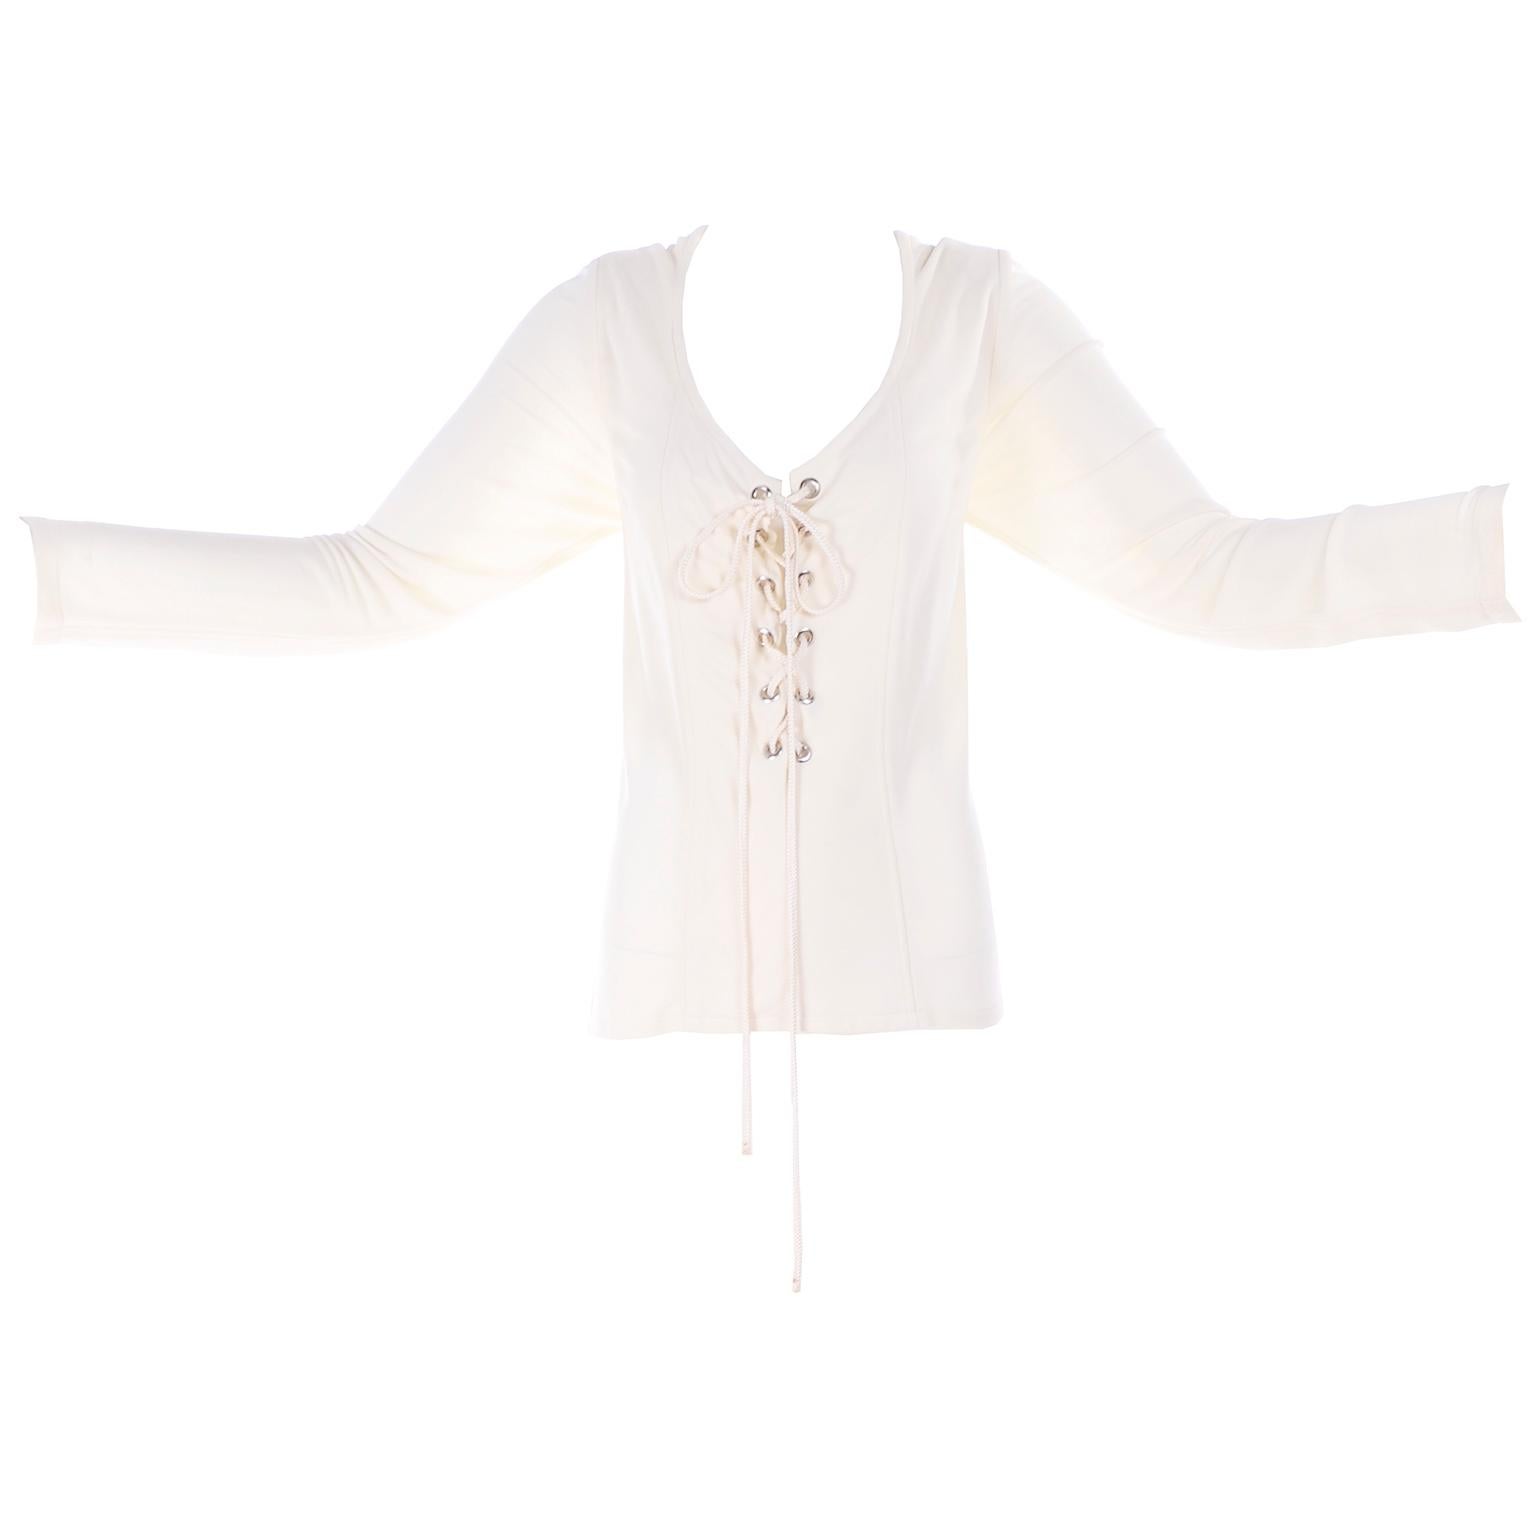 Yves Saint Laurent Top YSL Rive Gauche Lace Up Blouse in Cream Silk Jersey 42